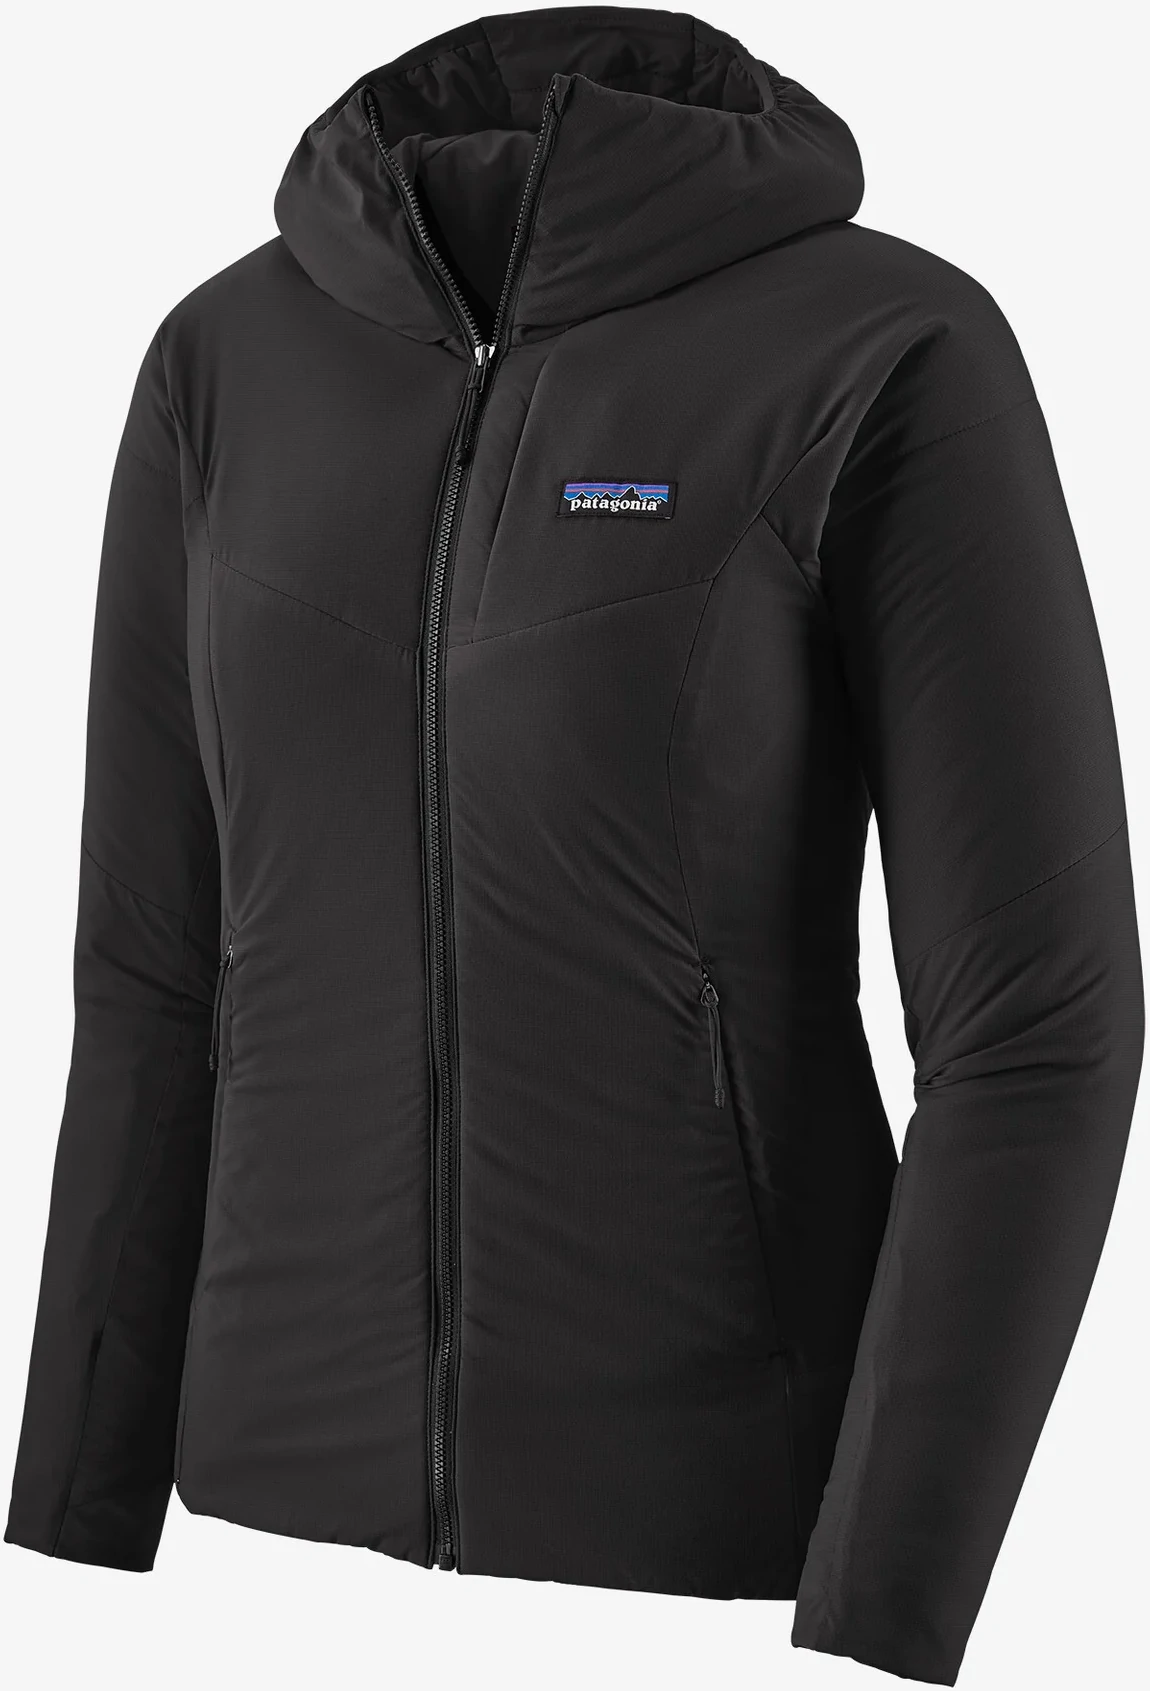 Unlock Wilderness' choice in the Patagonia Vs Arc'teryx comparison, the Nano Air Hoody by Patagonia